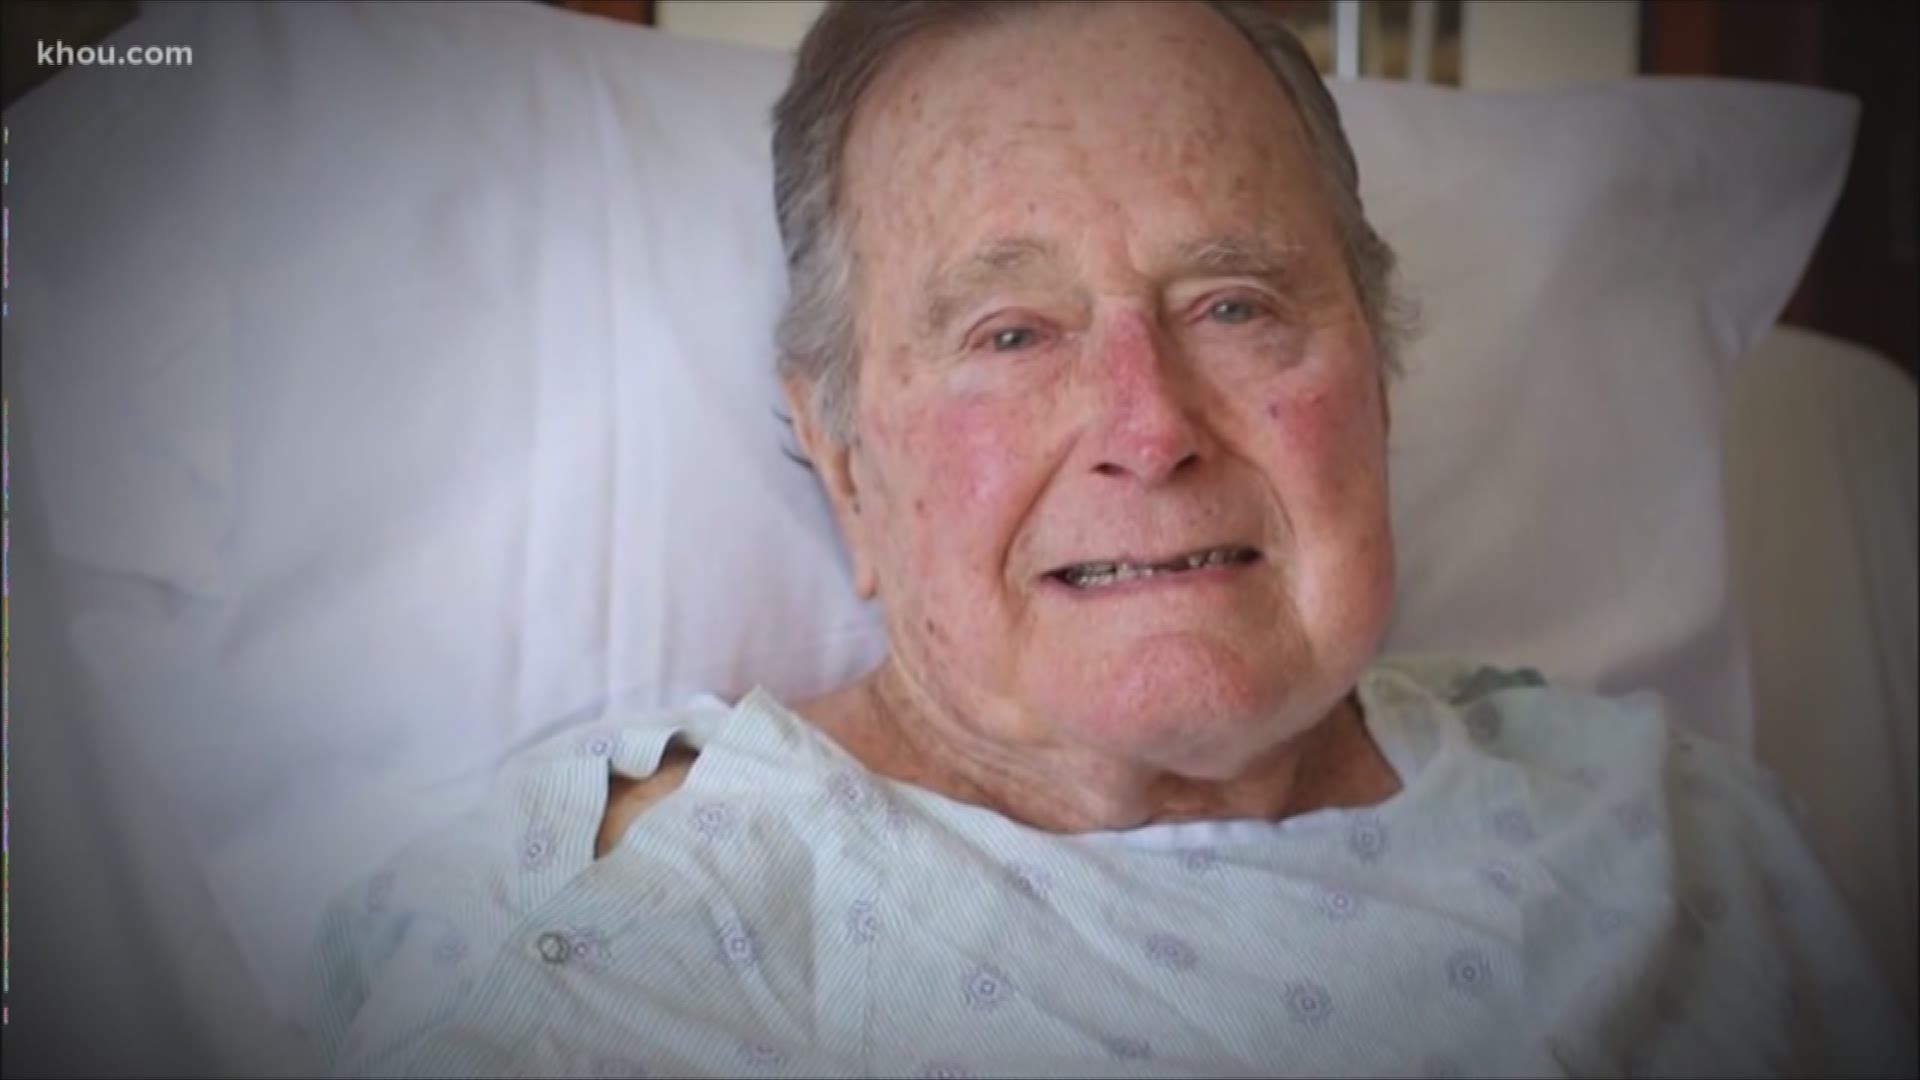 We've been learning so much about the life of President Bush, mostly thanks to your curiosity.